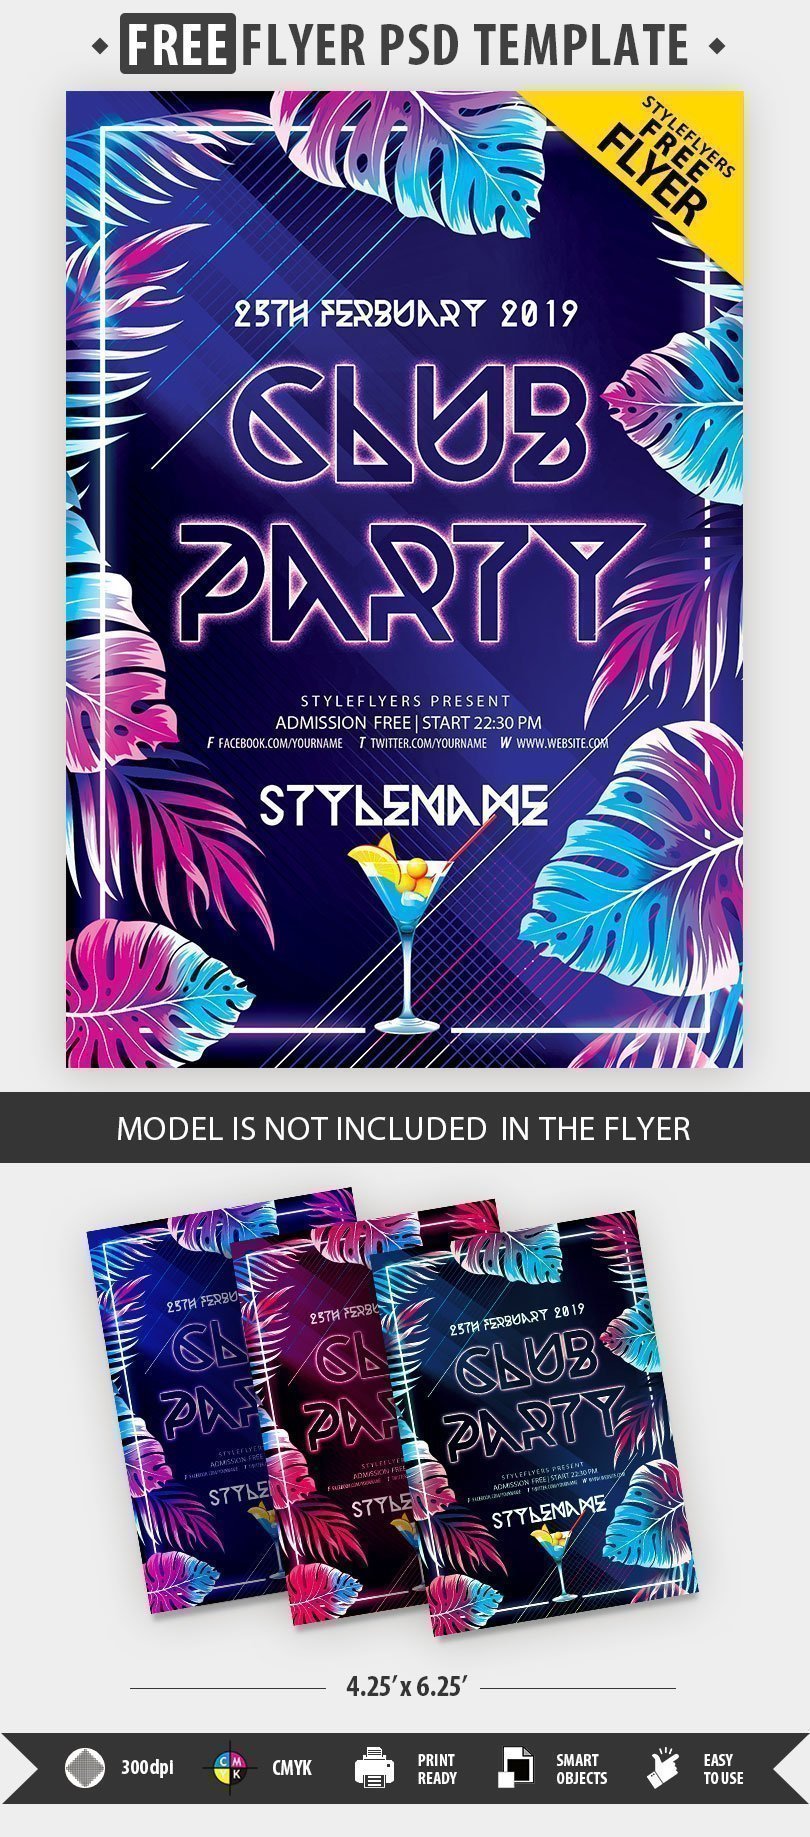 club-party-free-psd-flyer-template-free-download-33795-styleflyers